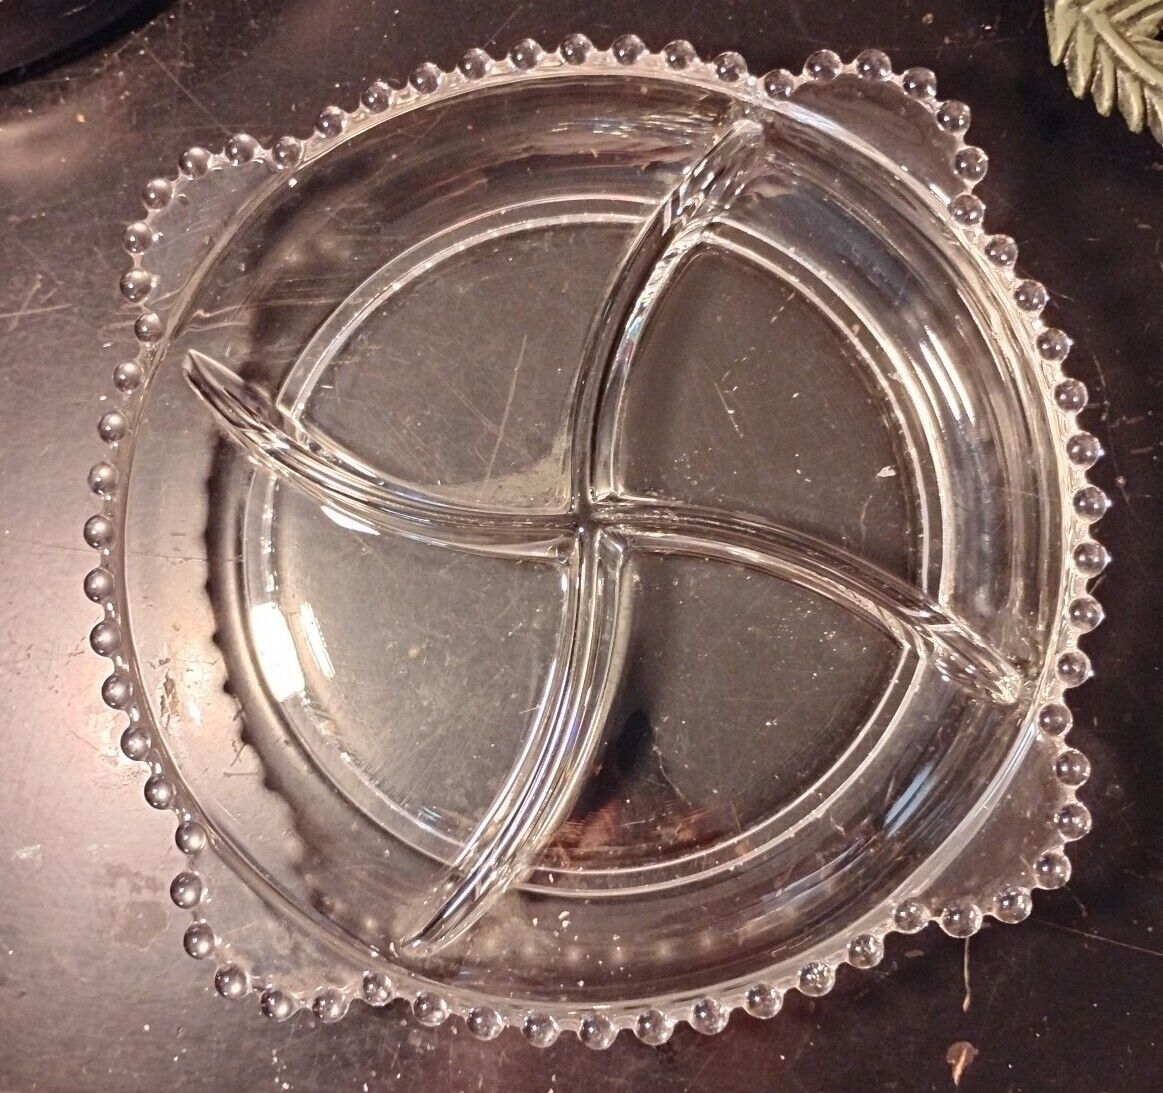 Vintage Imperial Glass Candlewick 4 Section Relish Tray 4-Handles 8 1/2